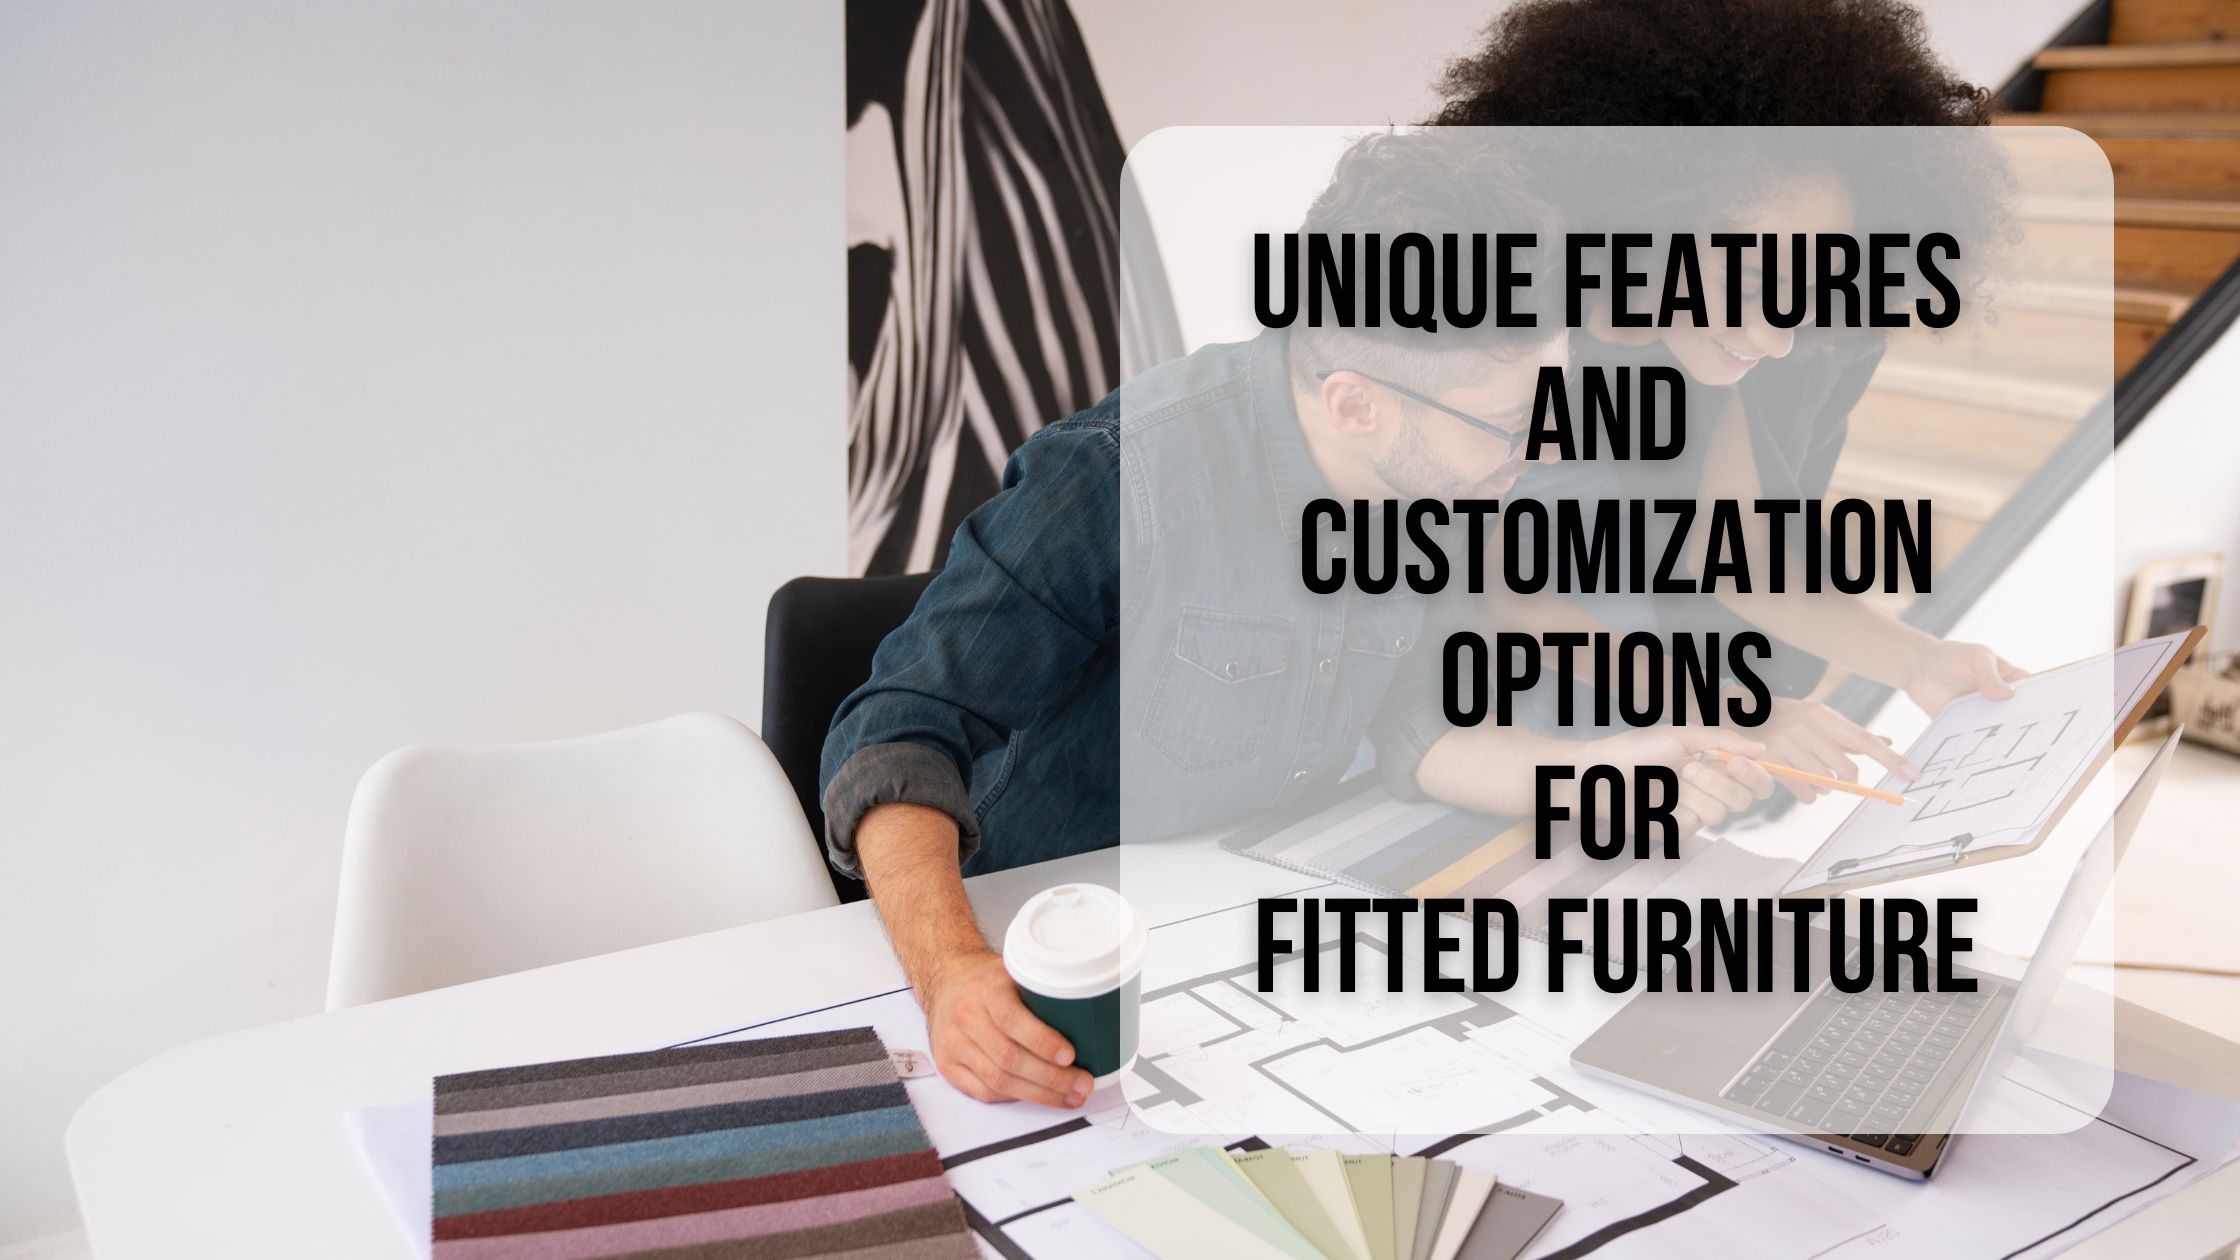 Unique features and customization options for fitted furniture